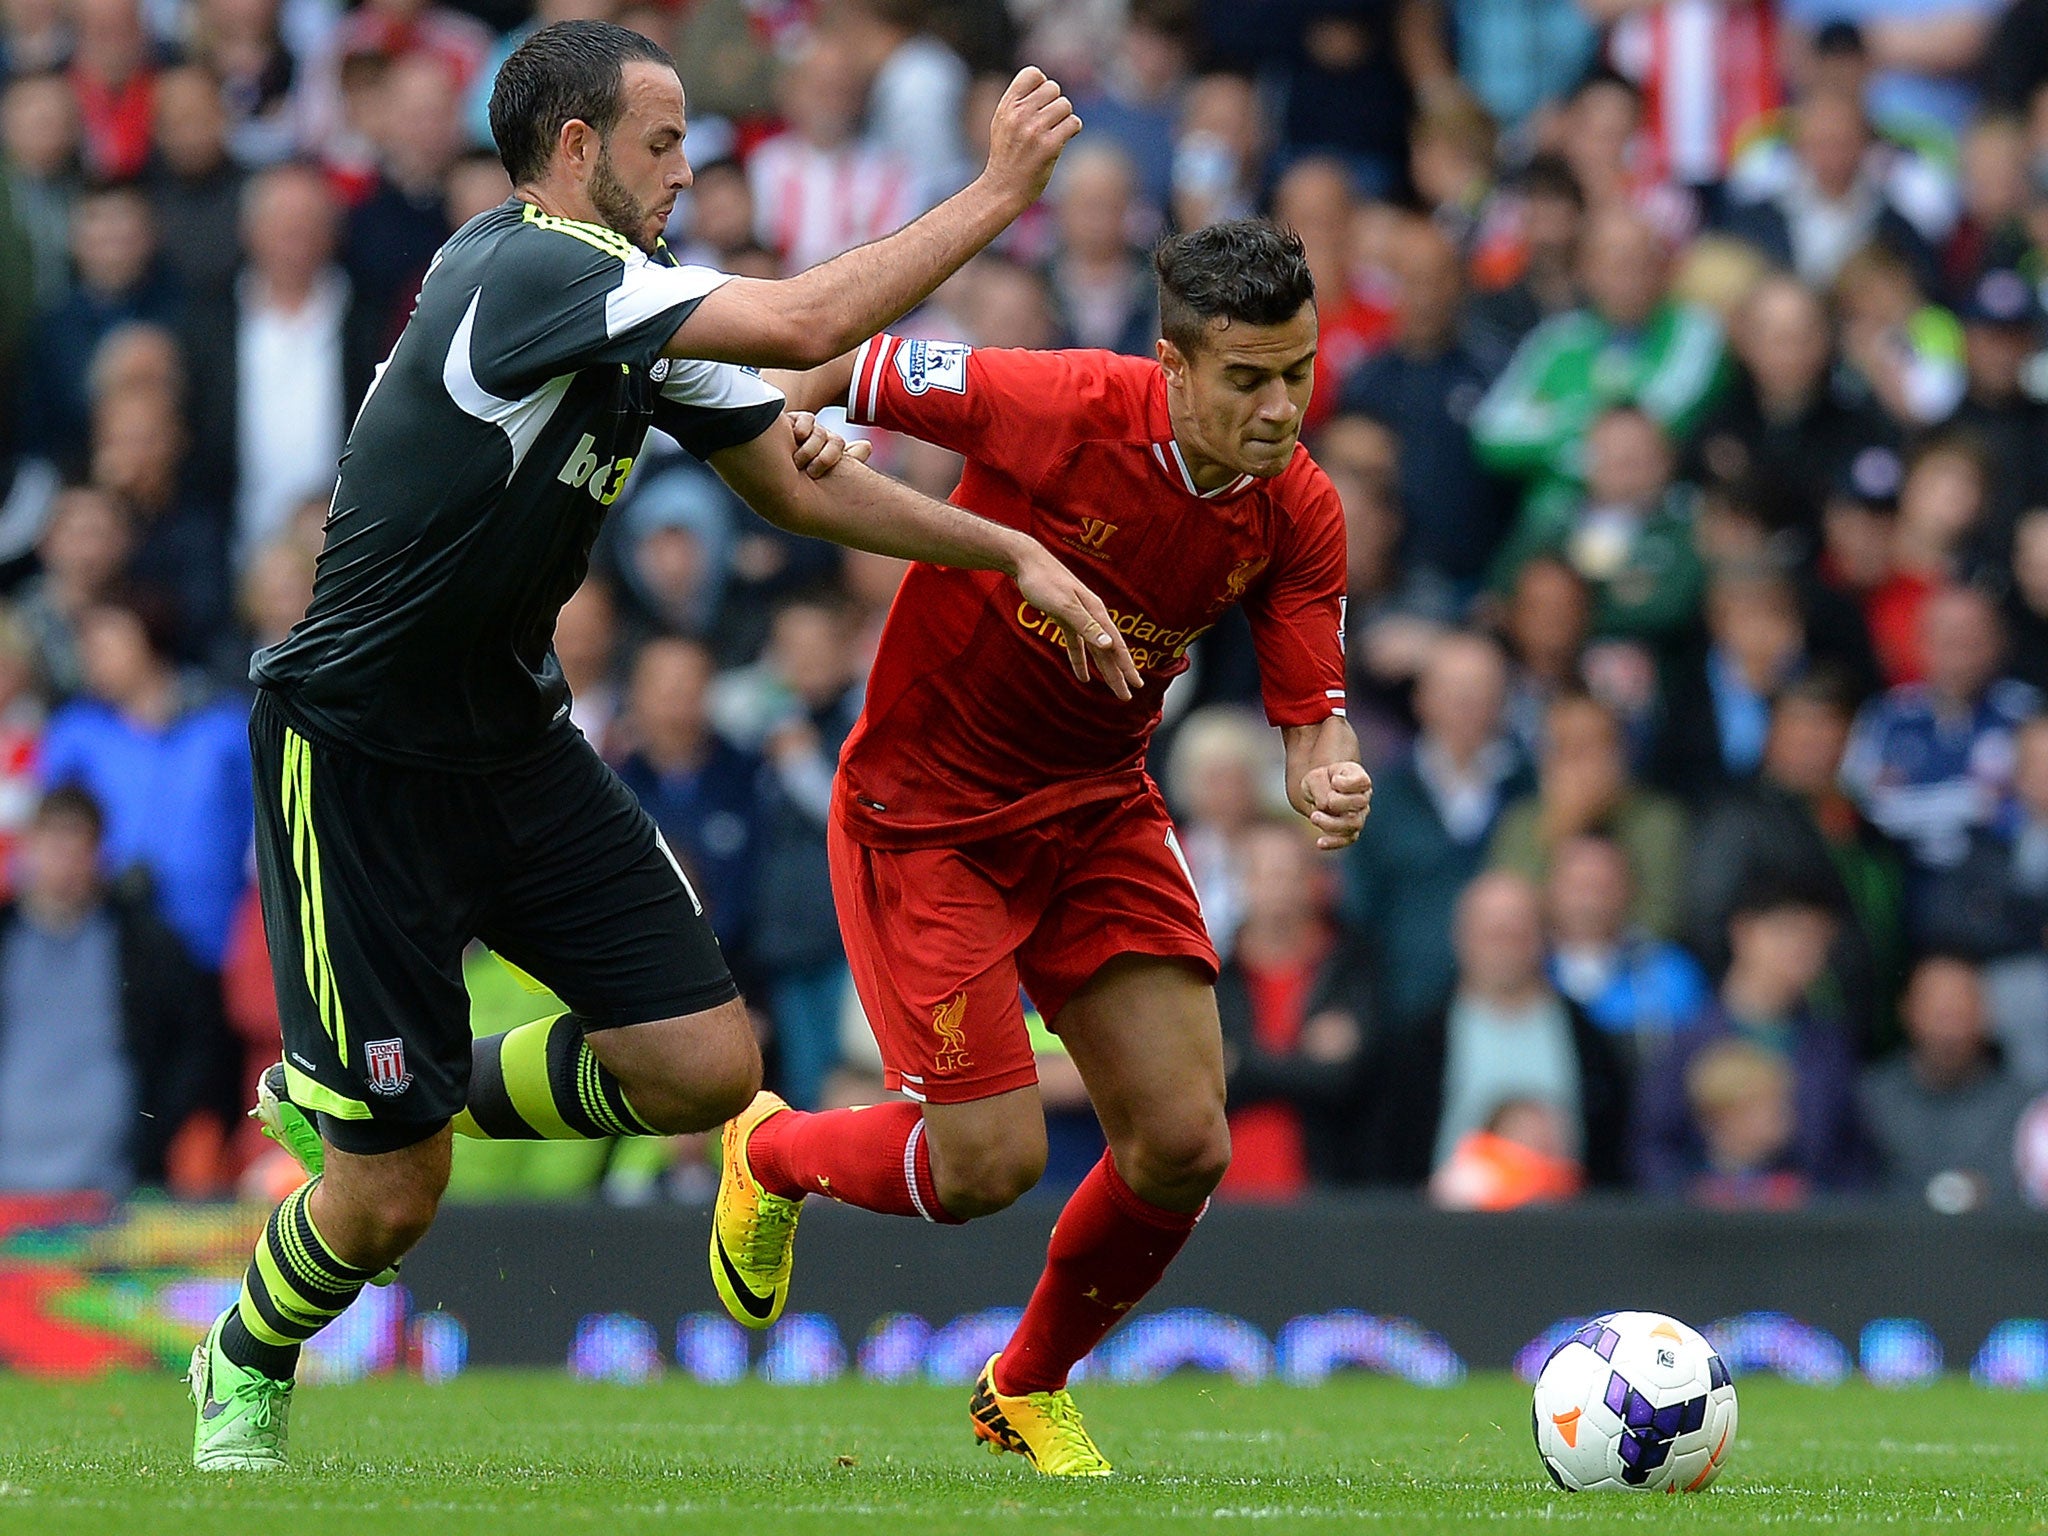 Coutinho in action against Stoke at Anfield